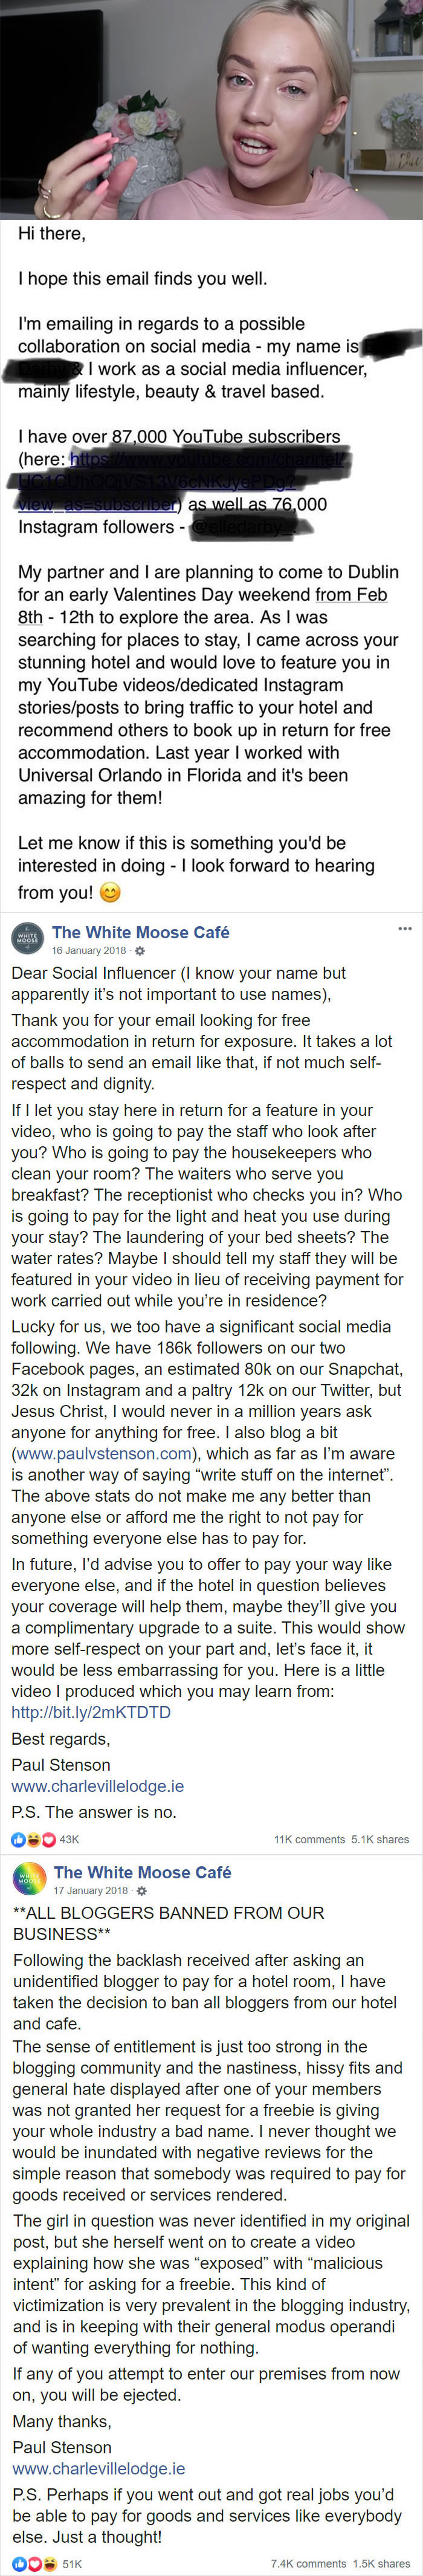 Influencer Tries To Get Accommodation For Free, They End Up Banning All Bloggers From Their Business